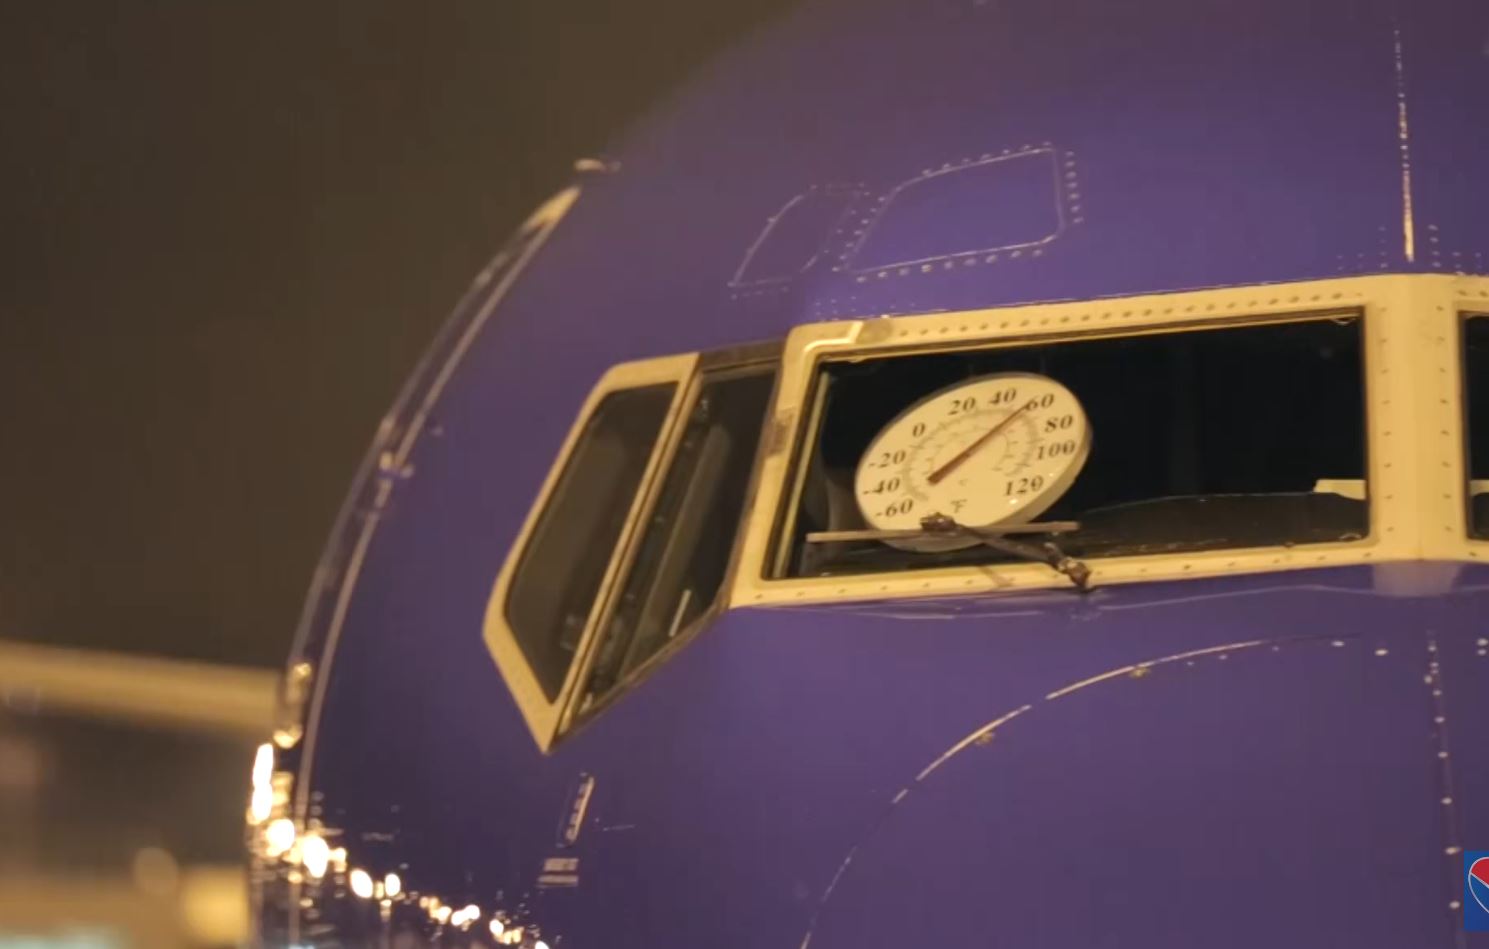 Southwest Airlines – Aircraft Cabin Temperature Monitor @ Denver Airport